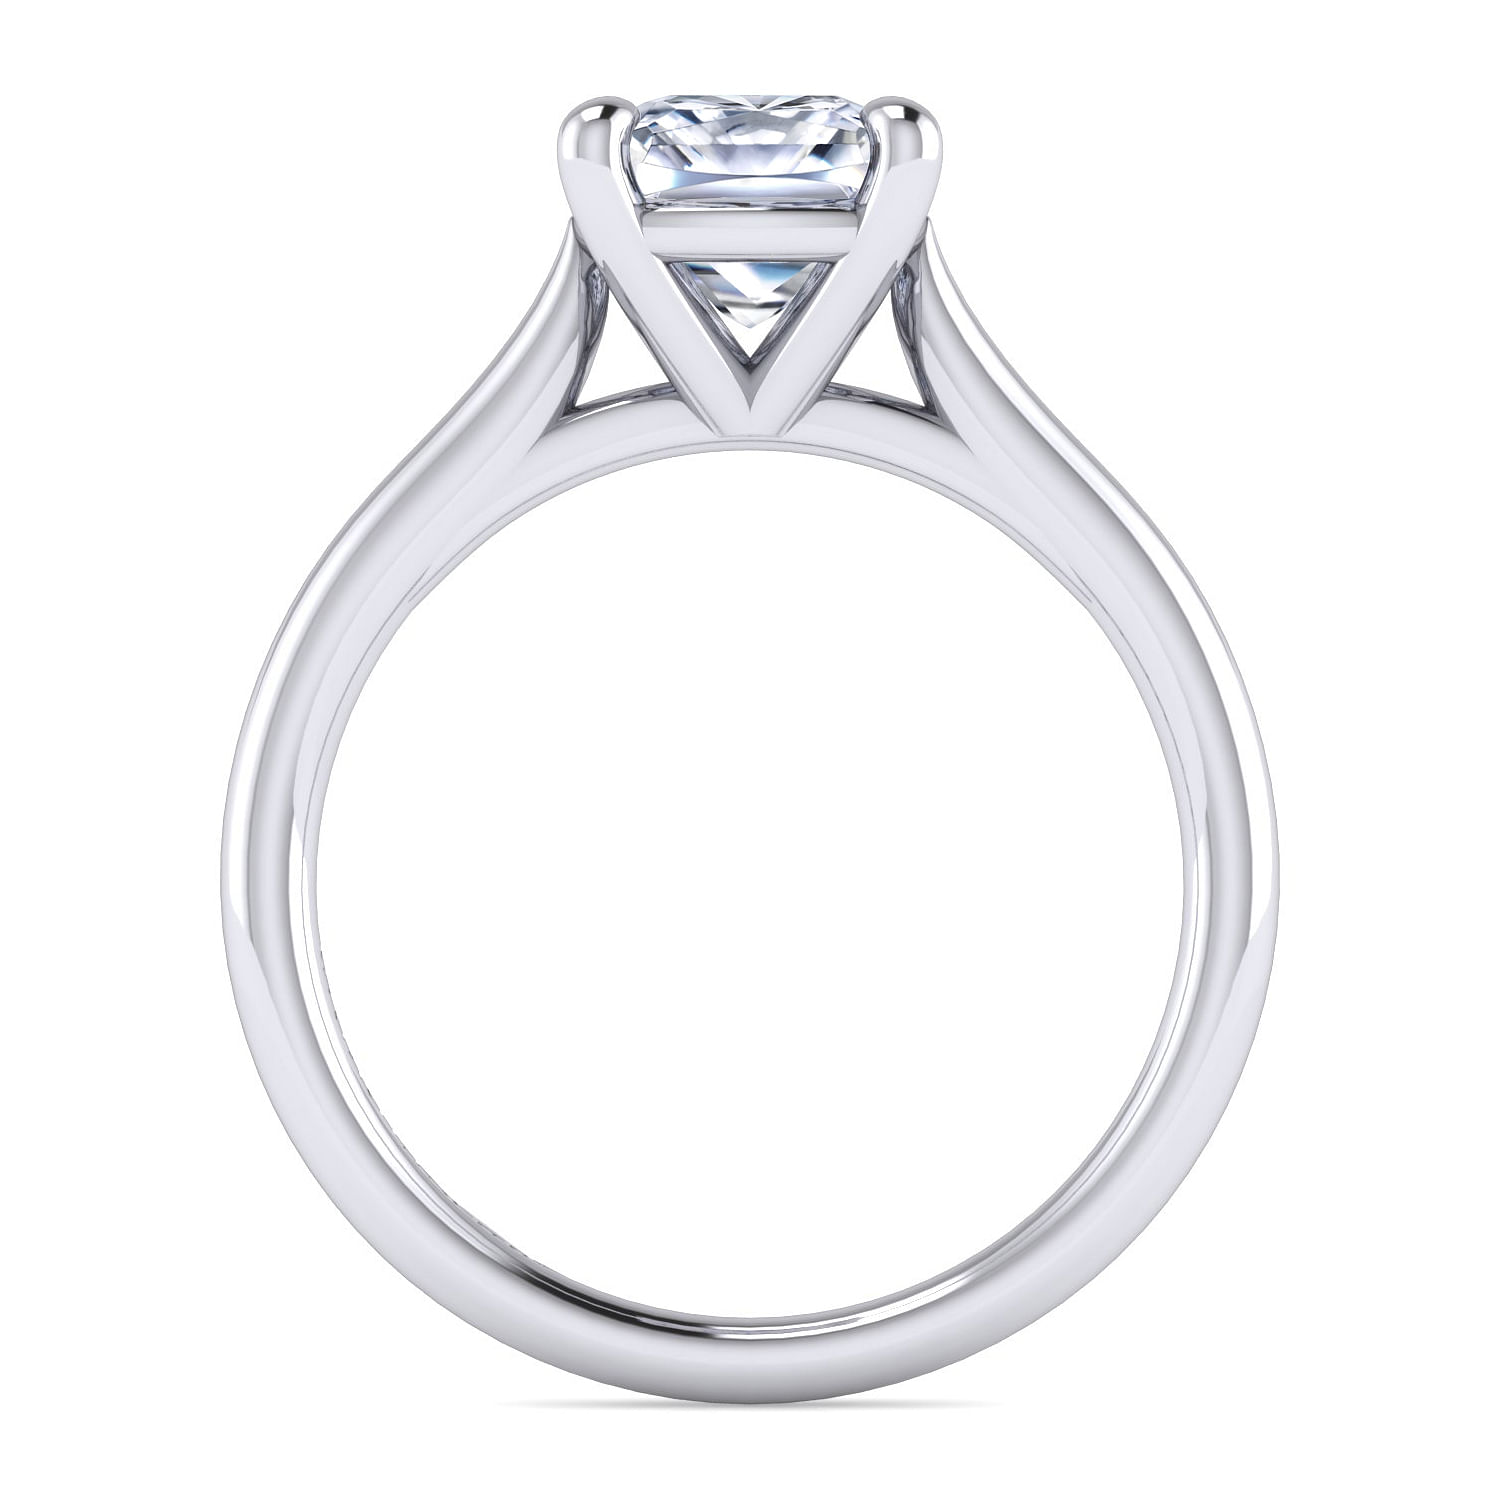 14K White Gold Cushion Cut Solitaire Diamond Engagement Ring